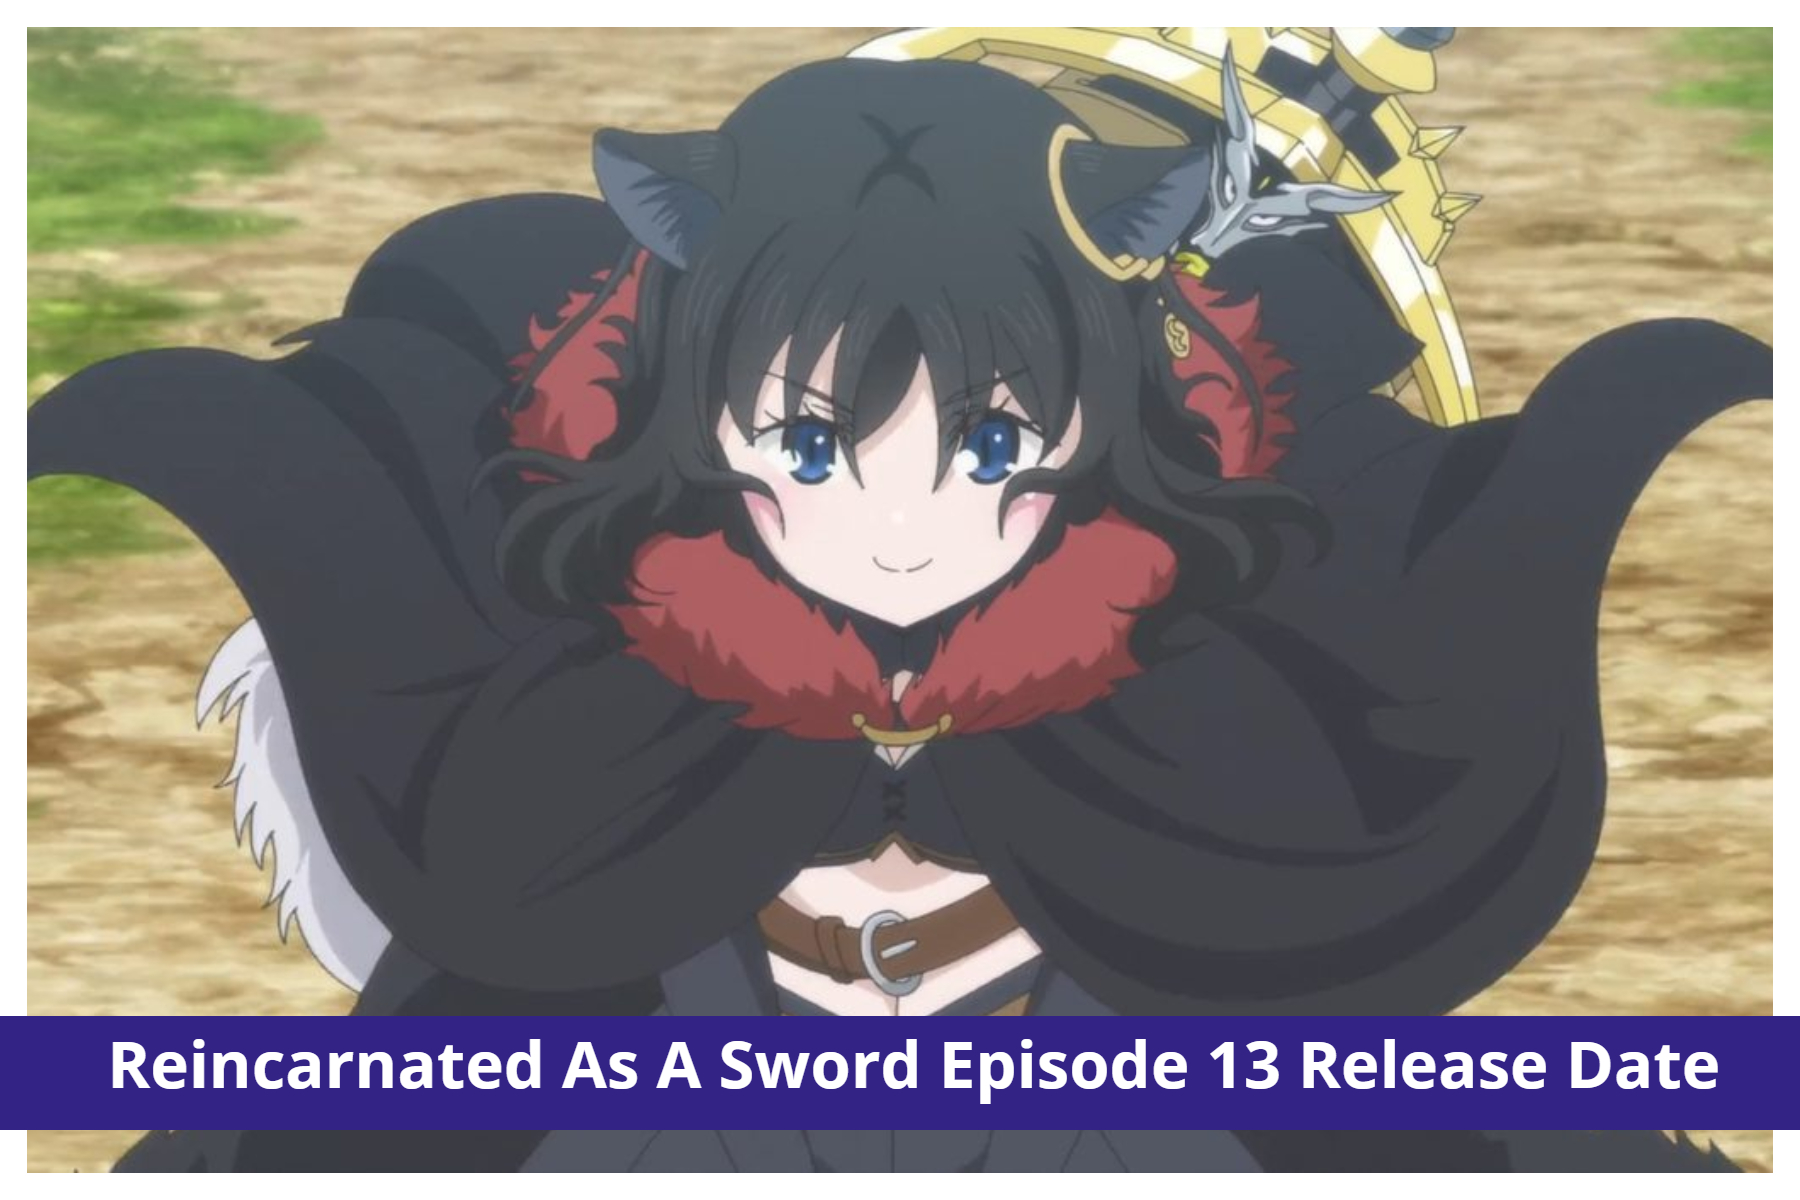 Reincarnated As A Sword Episode 13: Season 2 Teased! Release Date & More